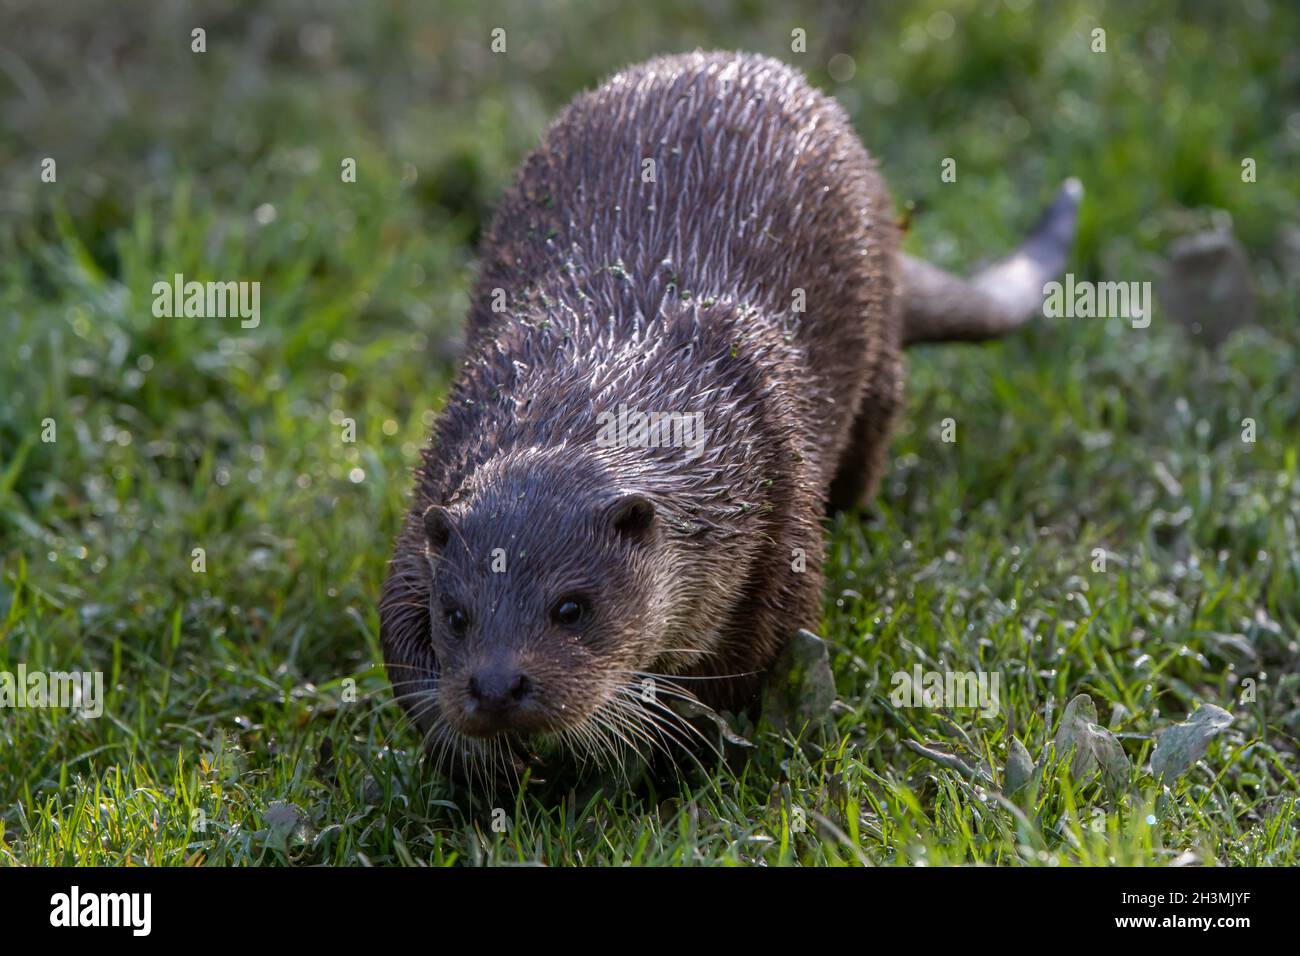 A European Otter bounds across a grassy bank at the British Wildlife Centre in Surrey, England Stock Photo